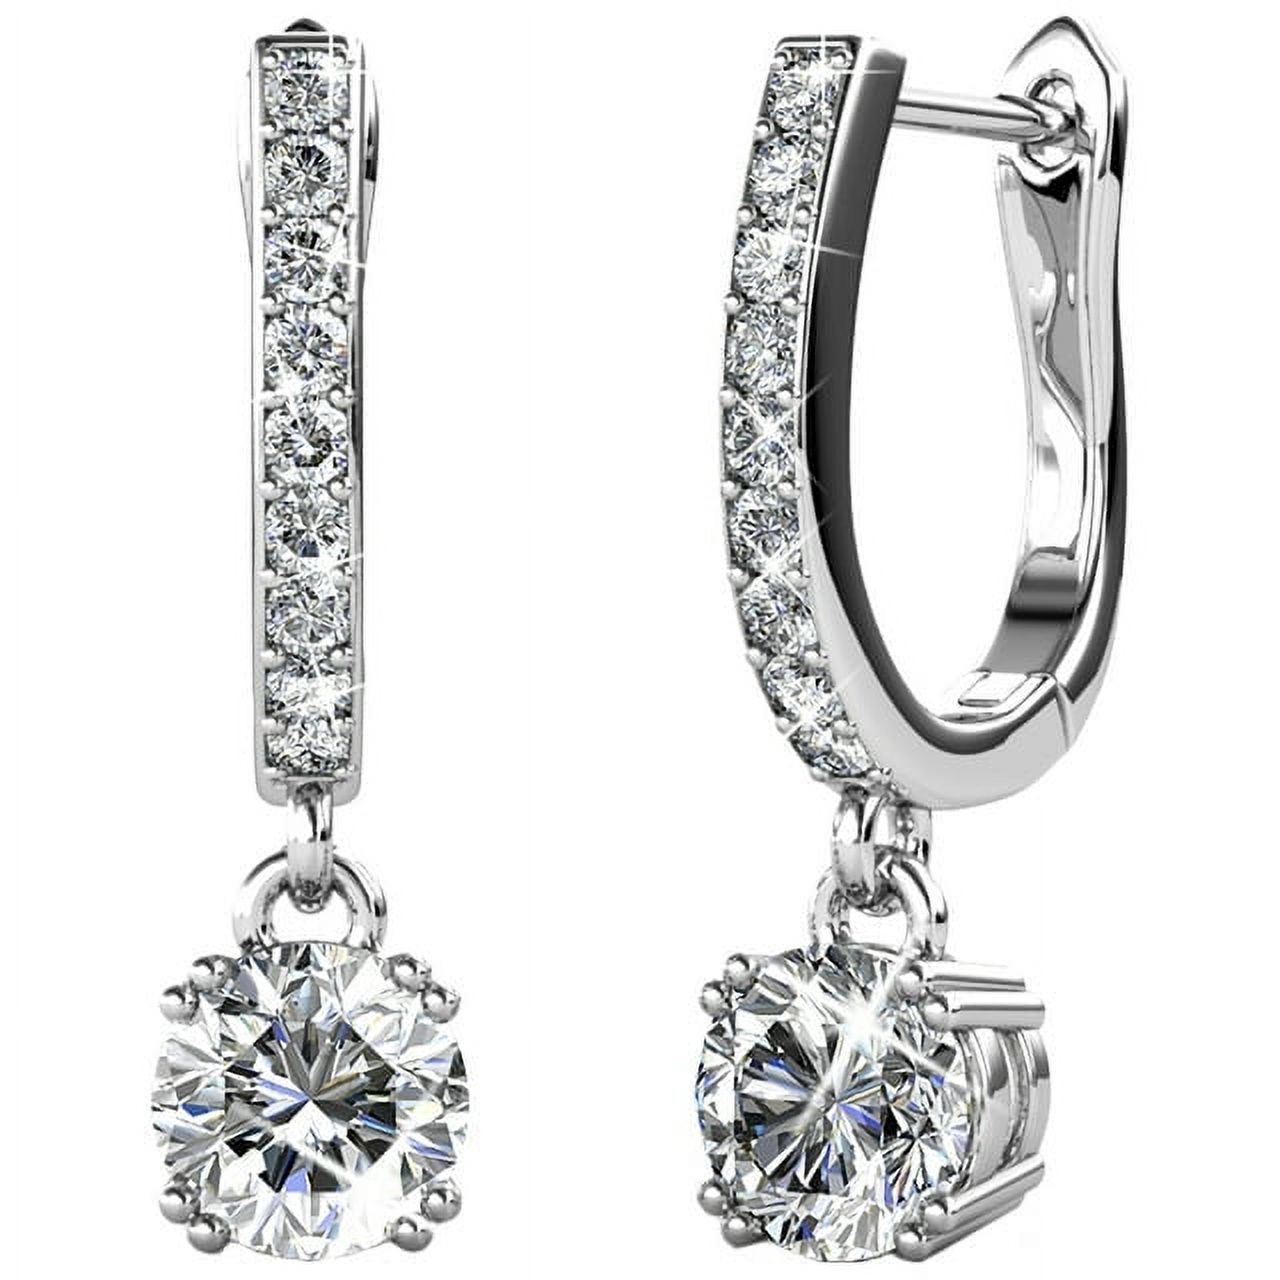 Cate & Chloe McKenzie 18k White Gold Plated Silver Drop Dangle Earrings | Women's Earrings with Crystals - image 1 of 10